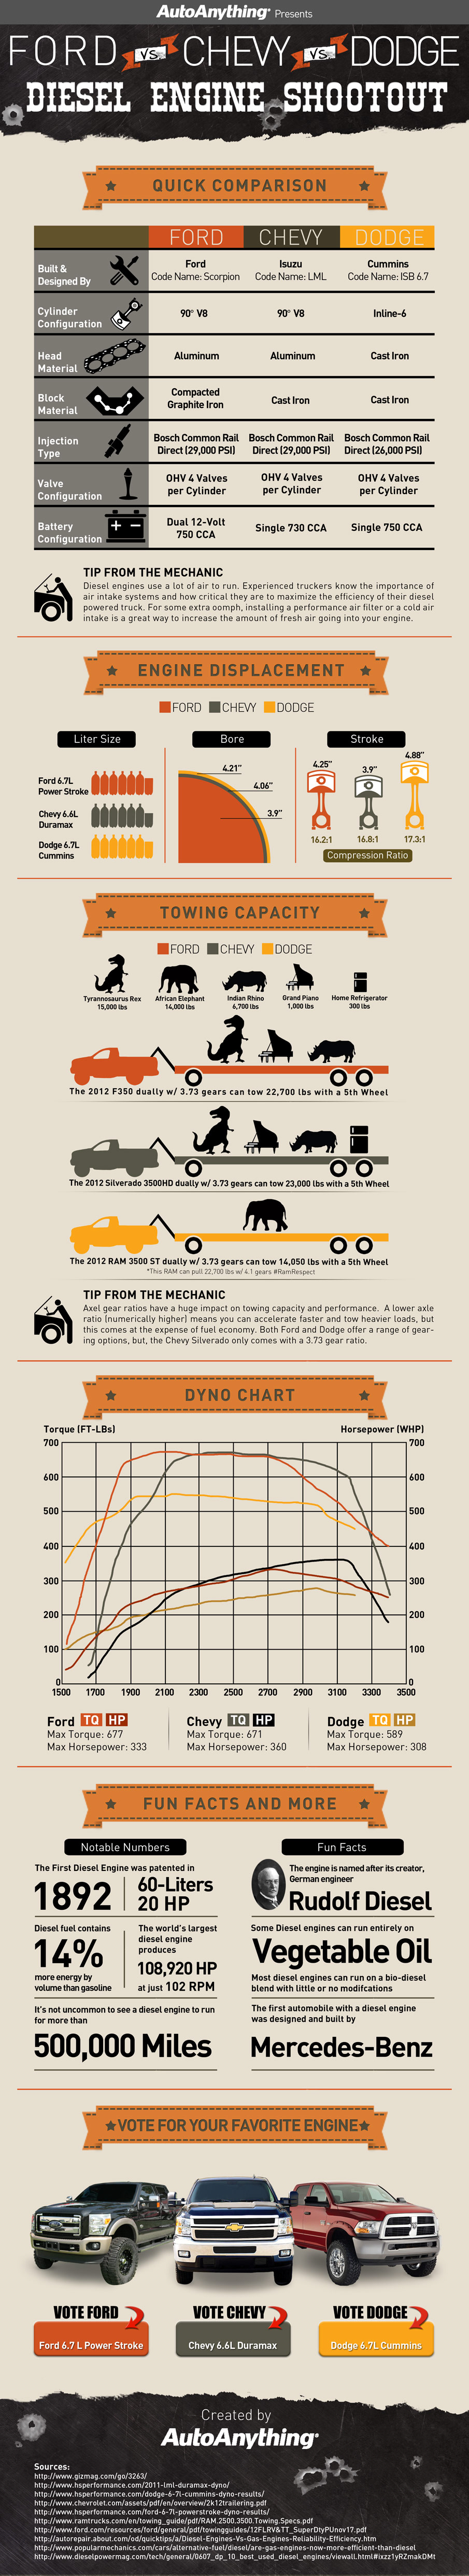 Chevy vs ford facts #8